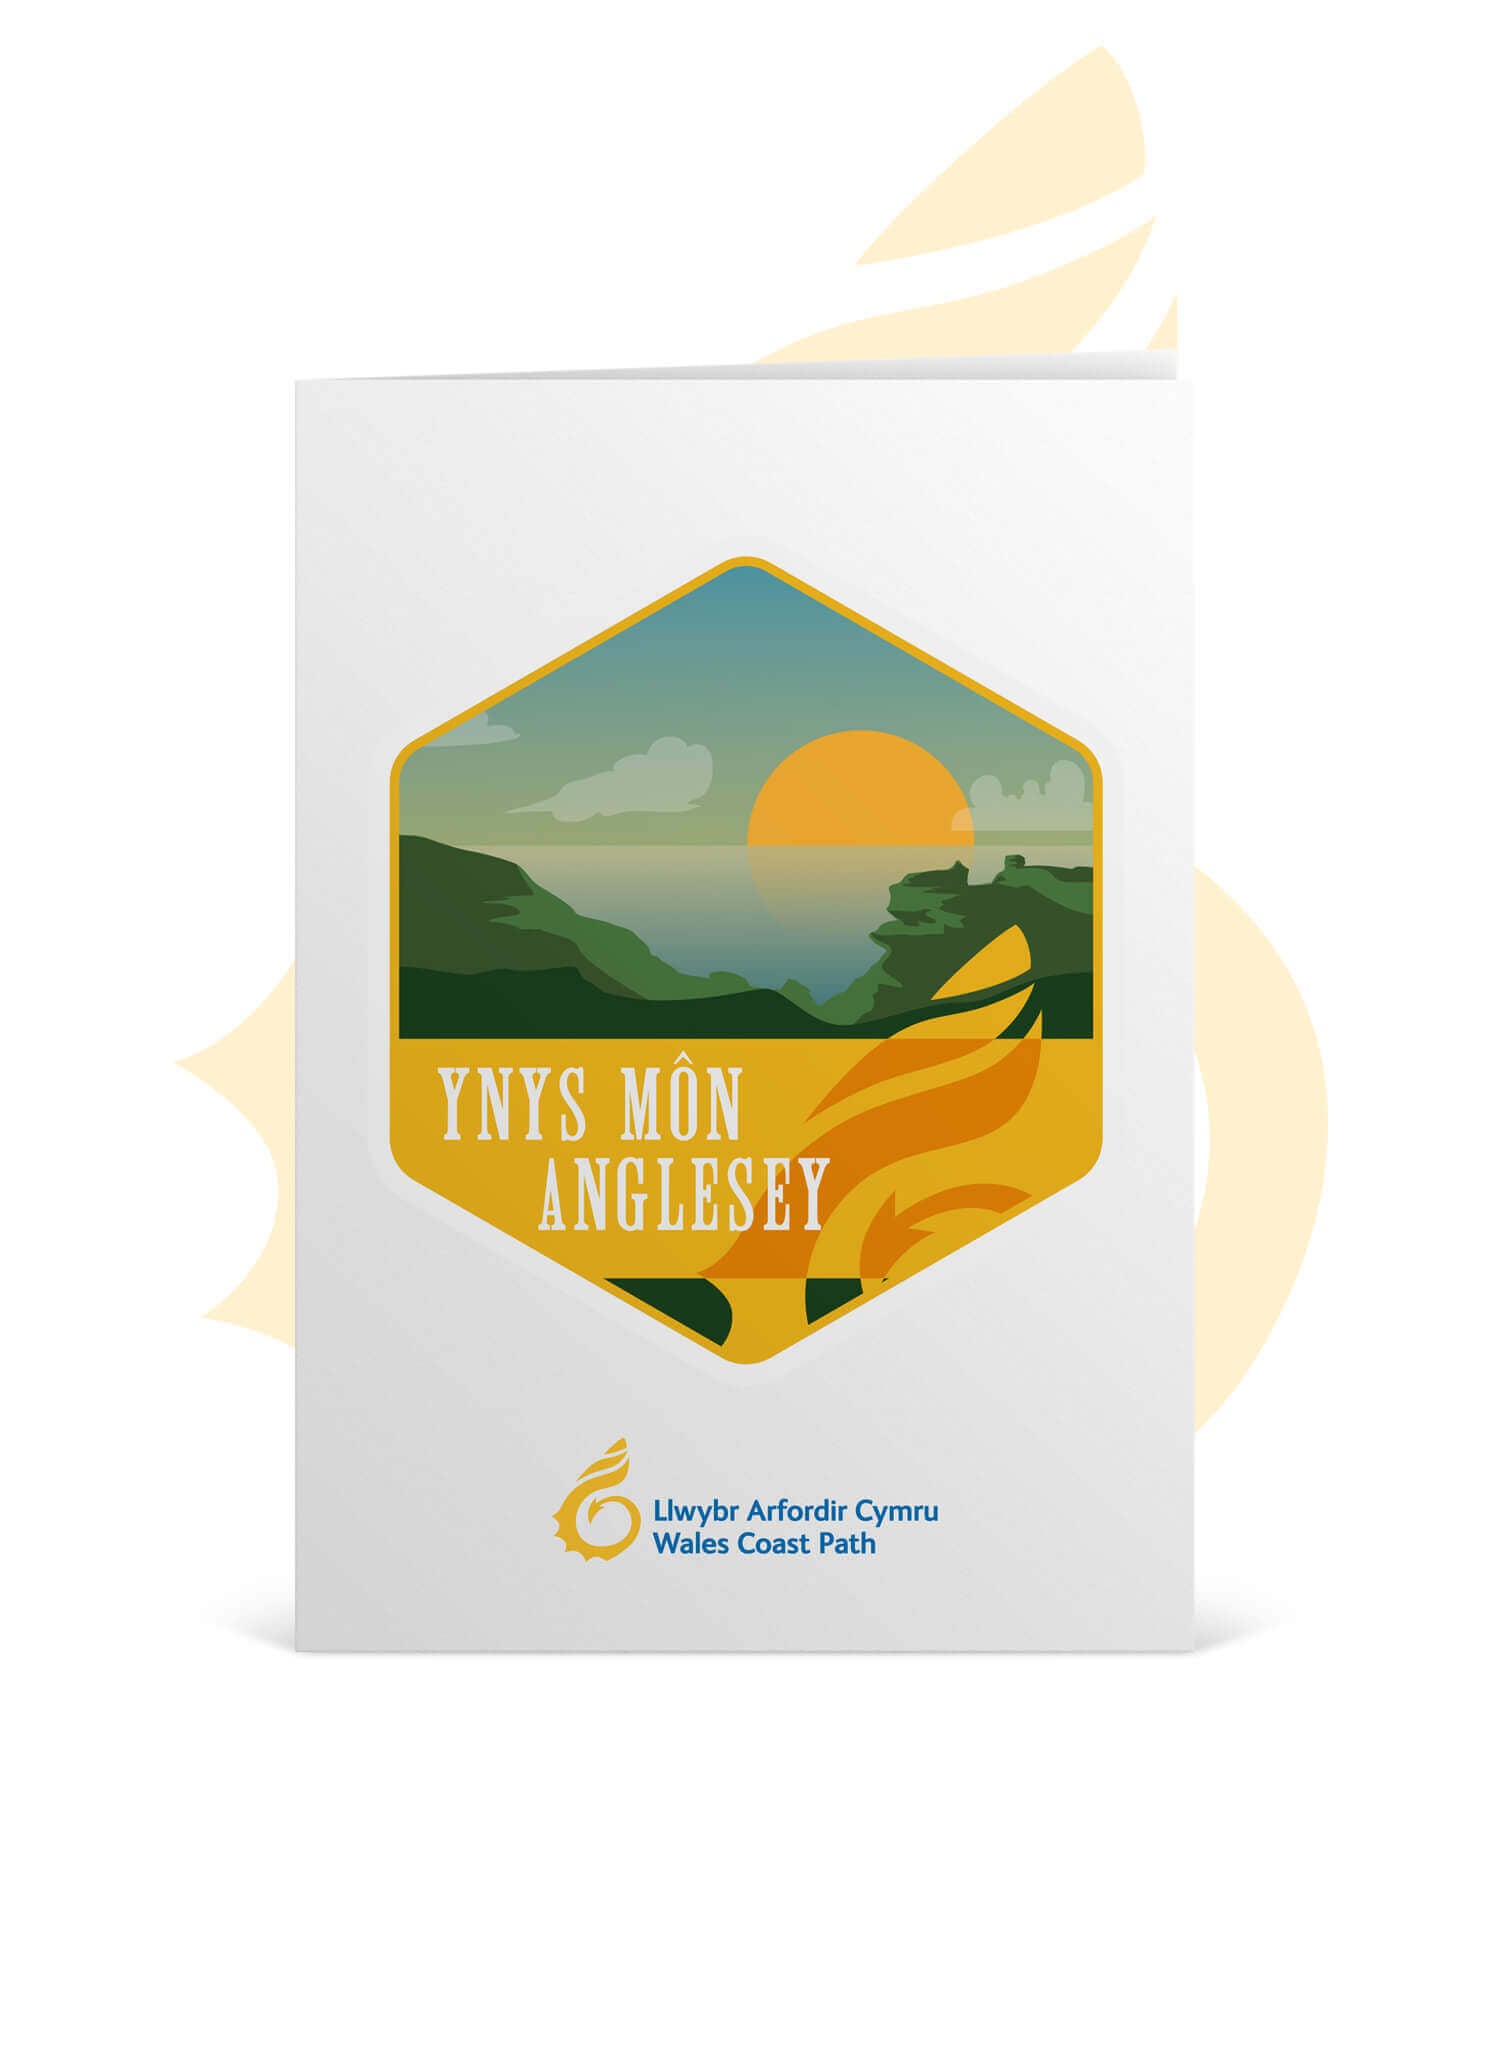 A5 greetings card with Anglesey inspired graphic. Wales Coast Path.